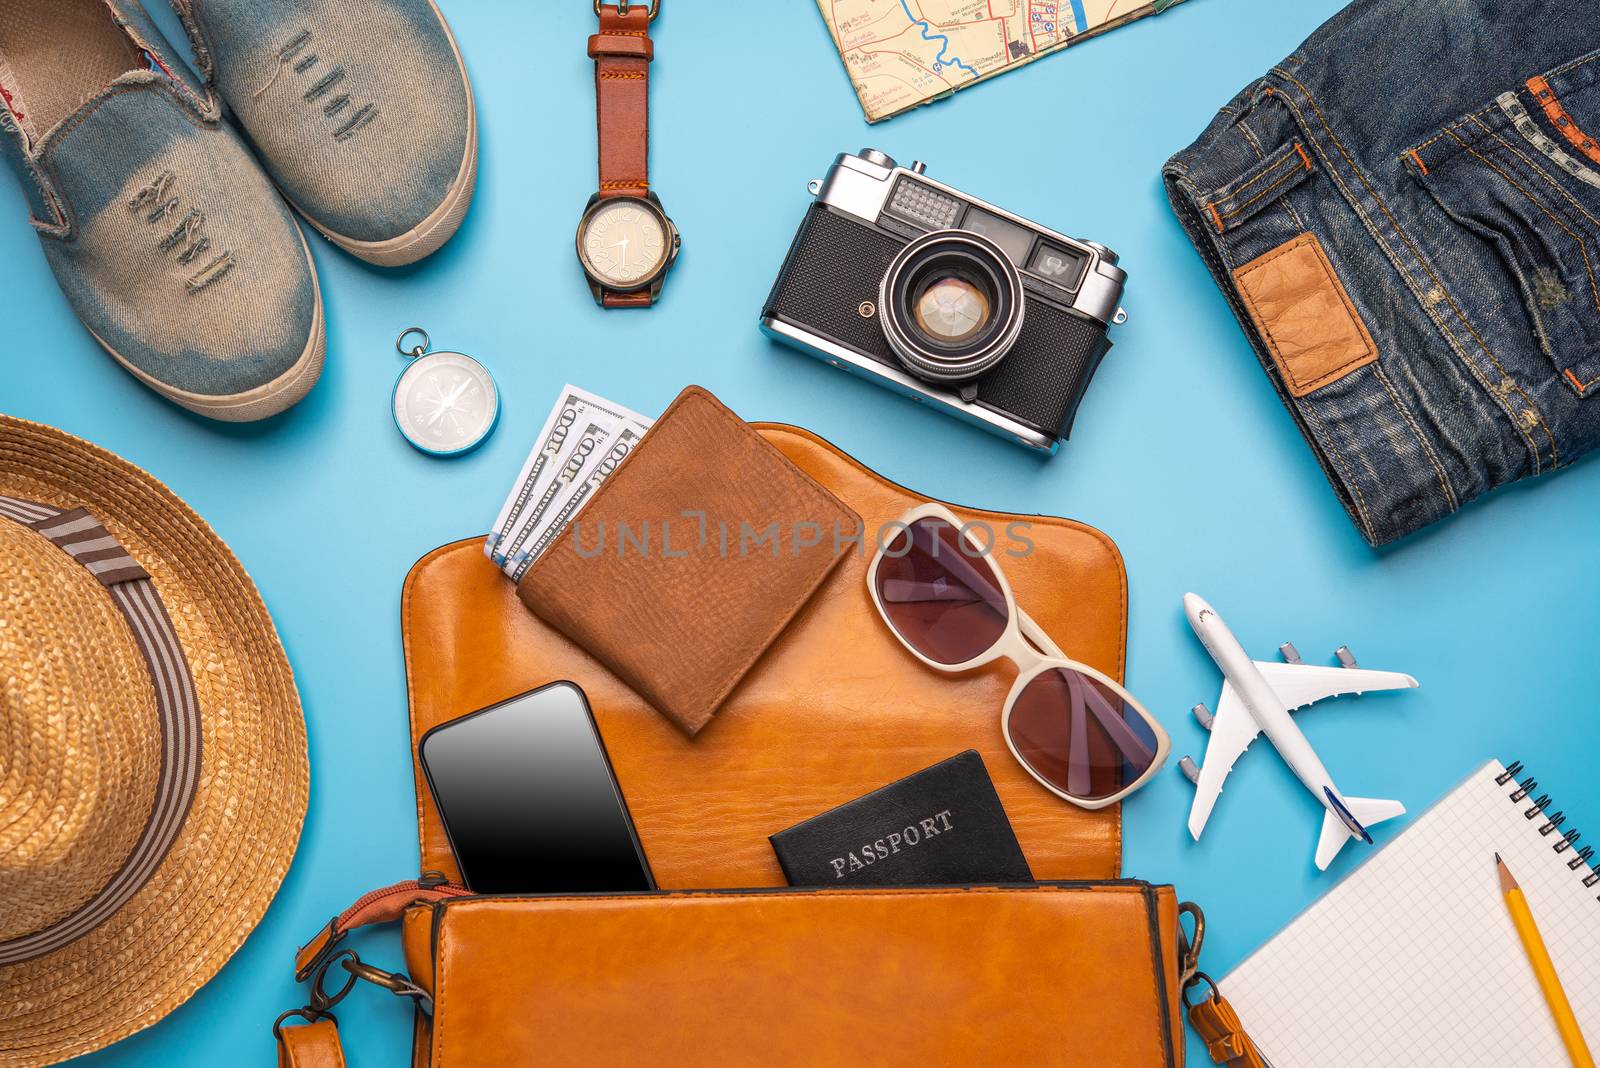 Travel accessories costumes. Passports, luggage, The cost of tra by photobyphotoboy